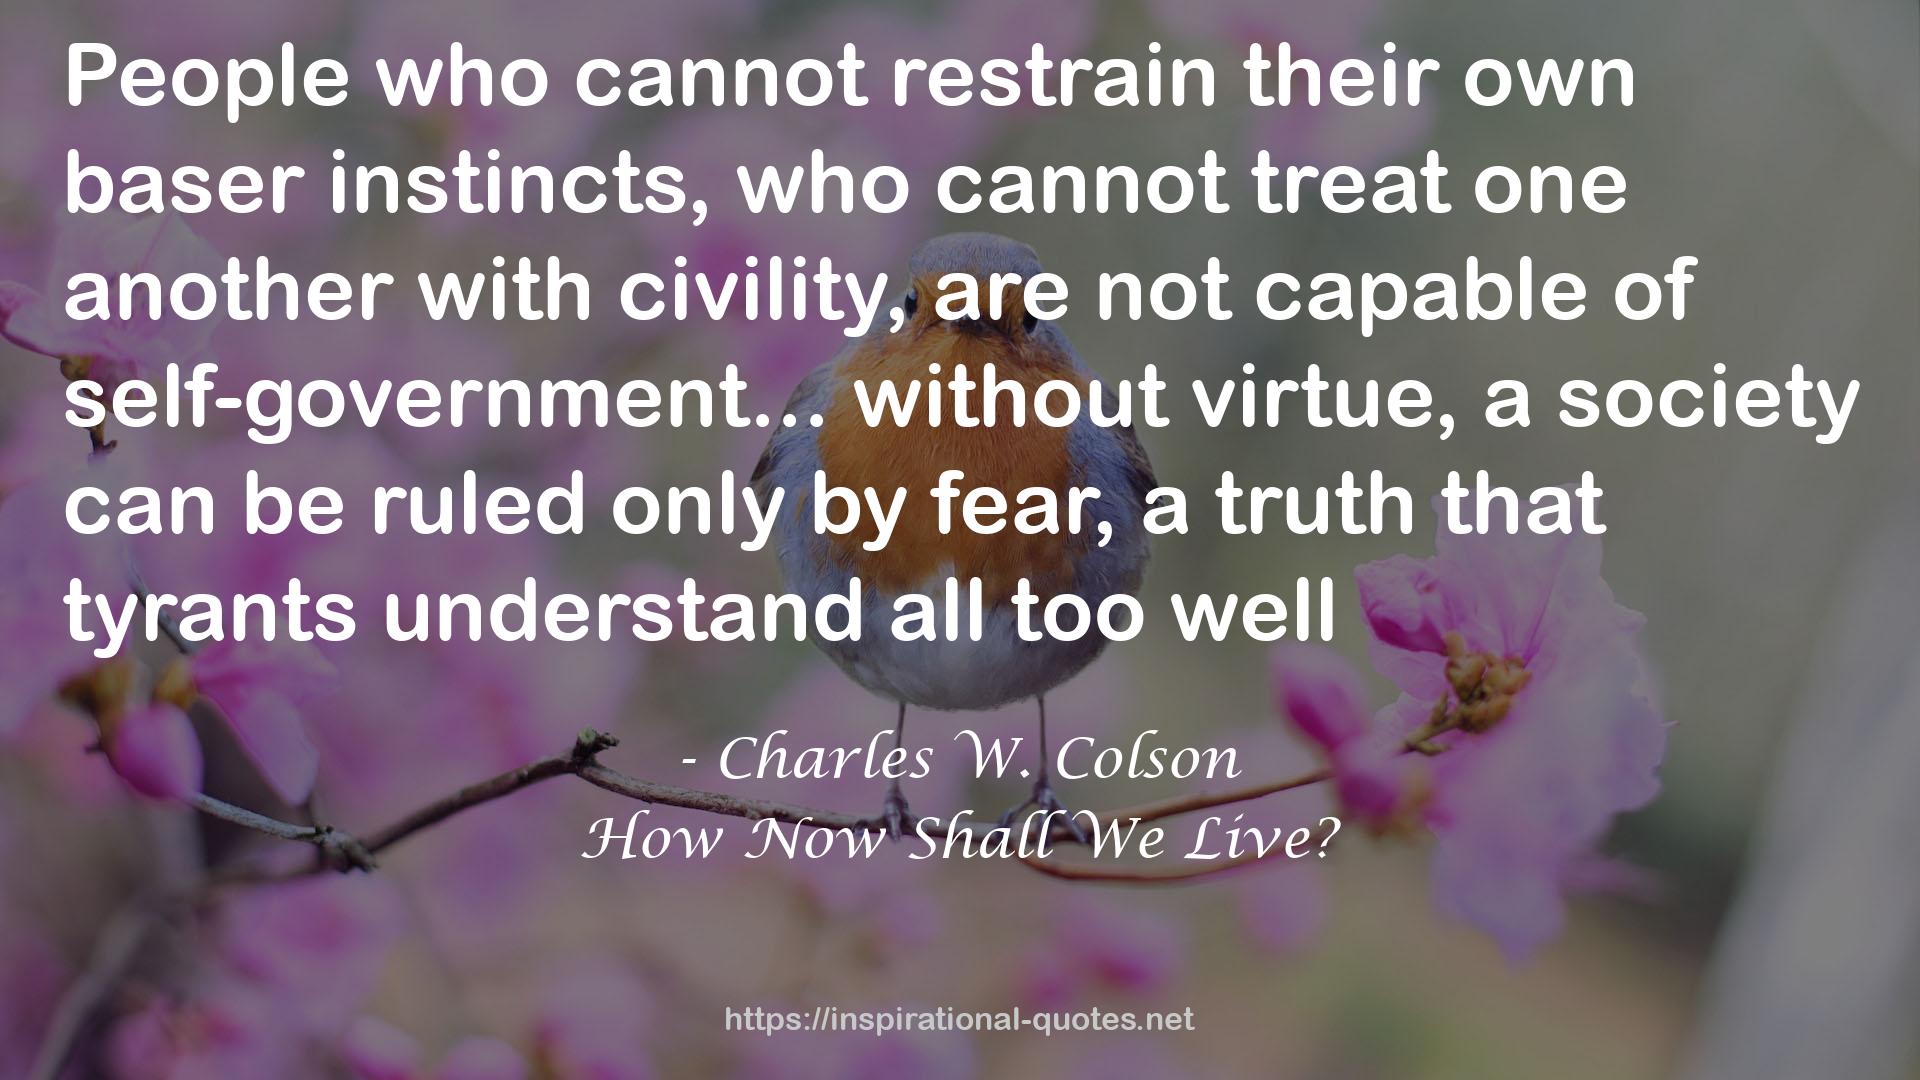 How Now Shall We Live? QUOTES